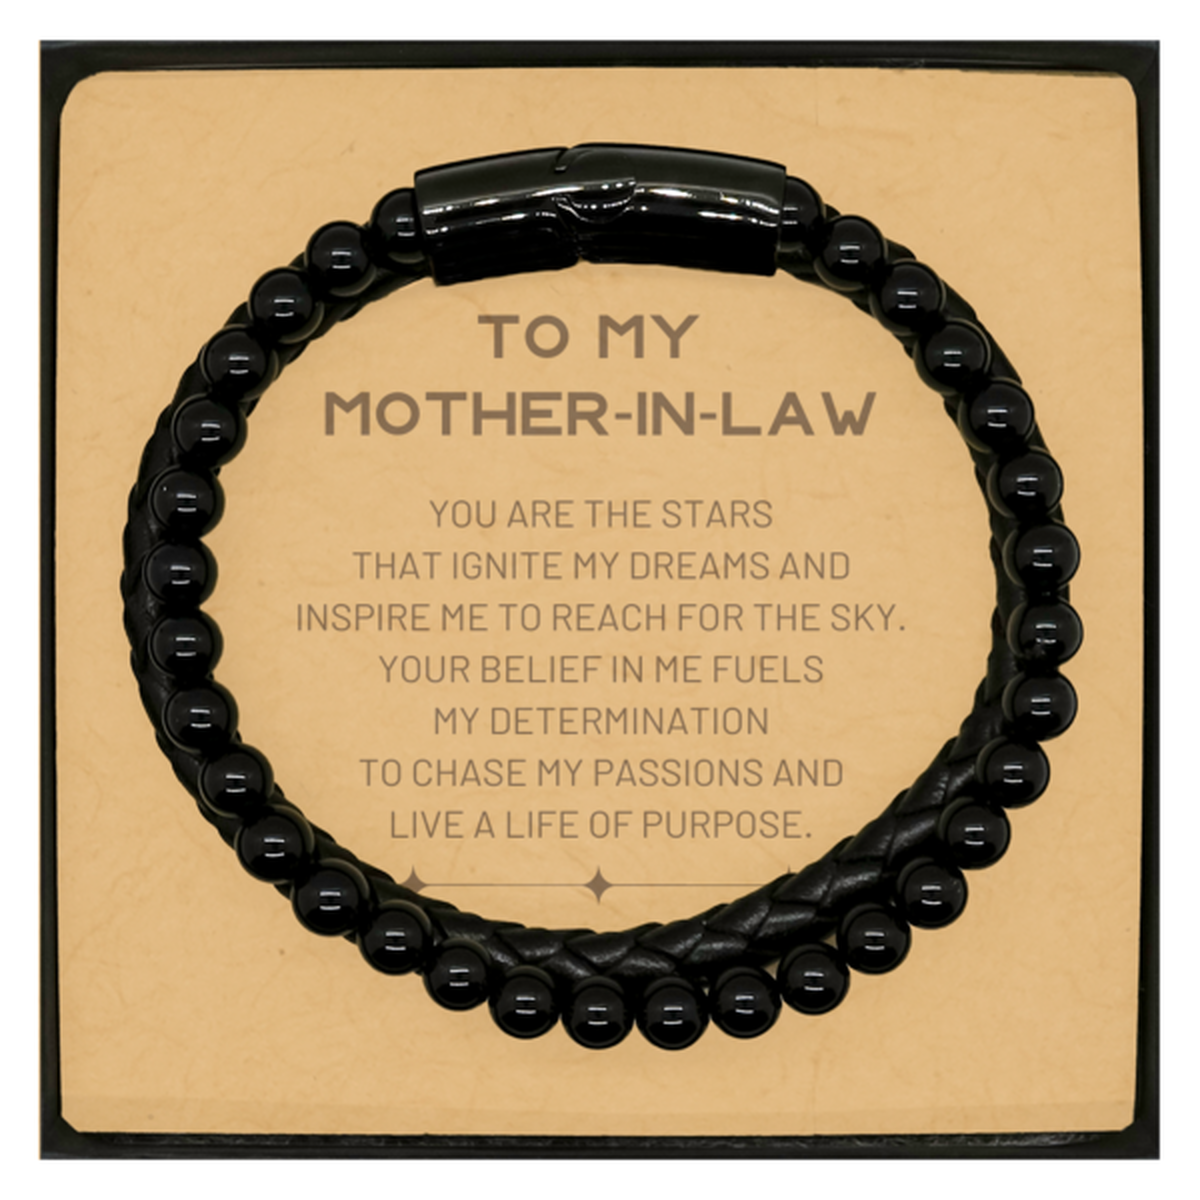 To My Mother-In-Law Stone Leather Bracelets, You are the stars that ignite my dreams and inspire me to reach for the sky, Birthday Christmas Unique Gifts For Mother-In-Law, Thank You Gifts For Mother-In-Law